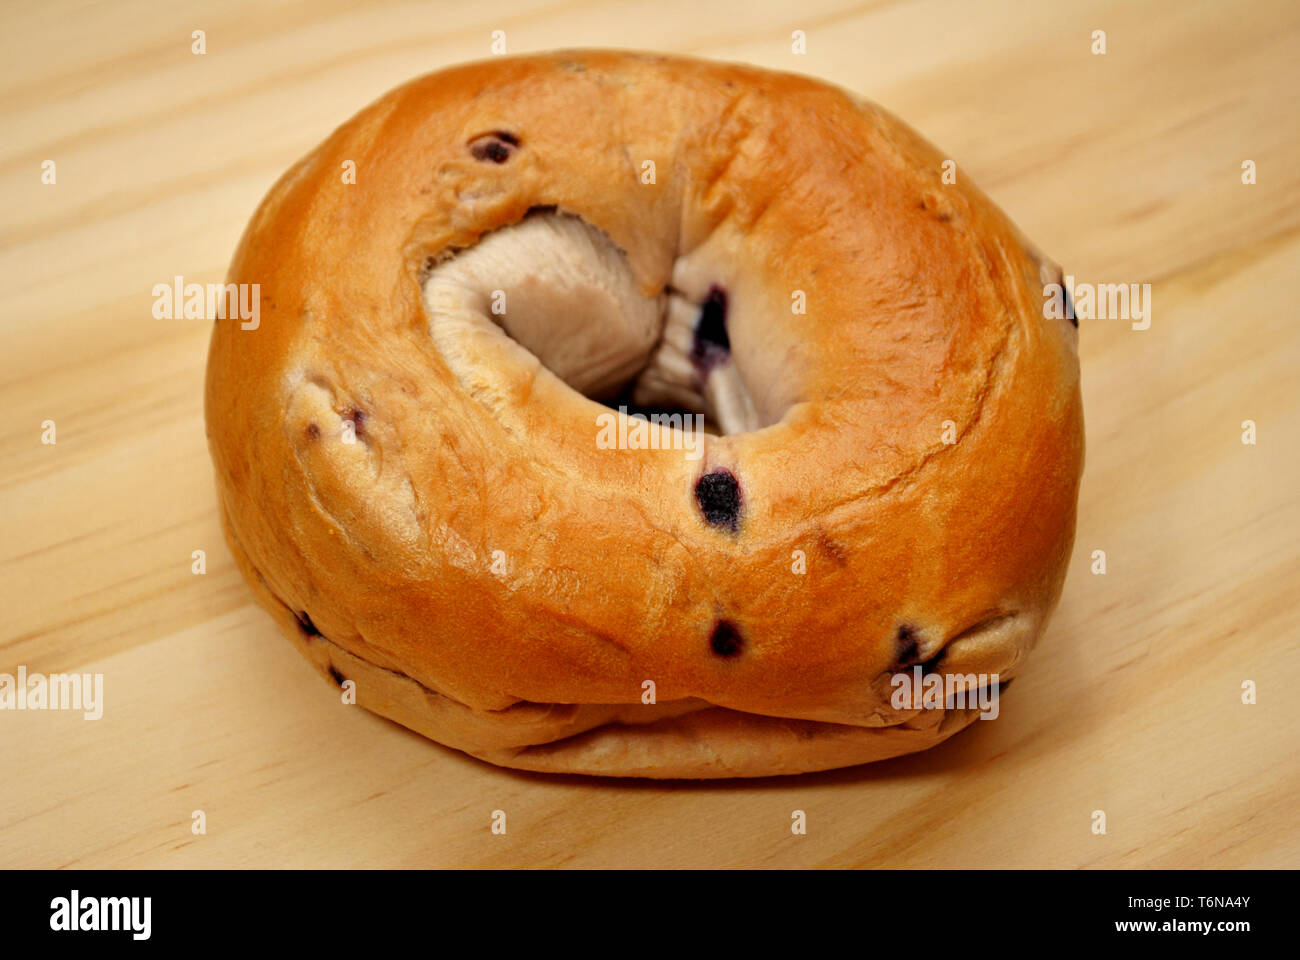 Whole Blueberry Bagel on a Wooden Surface Stock Photo